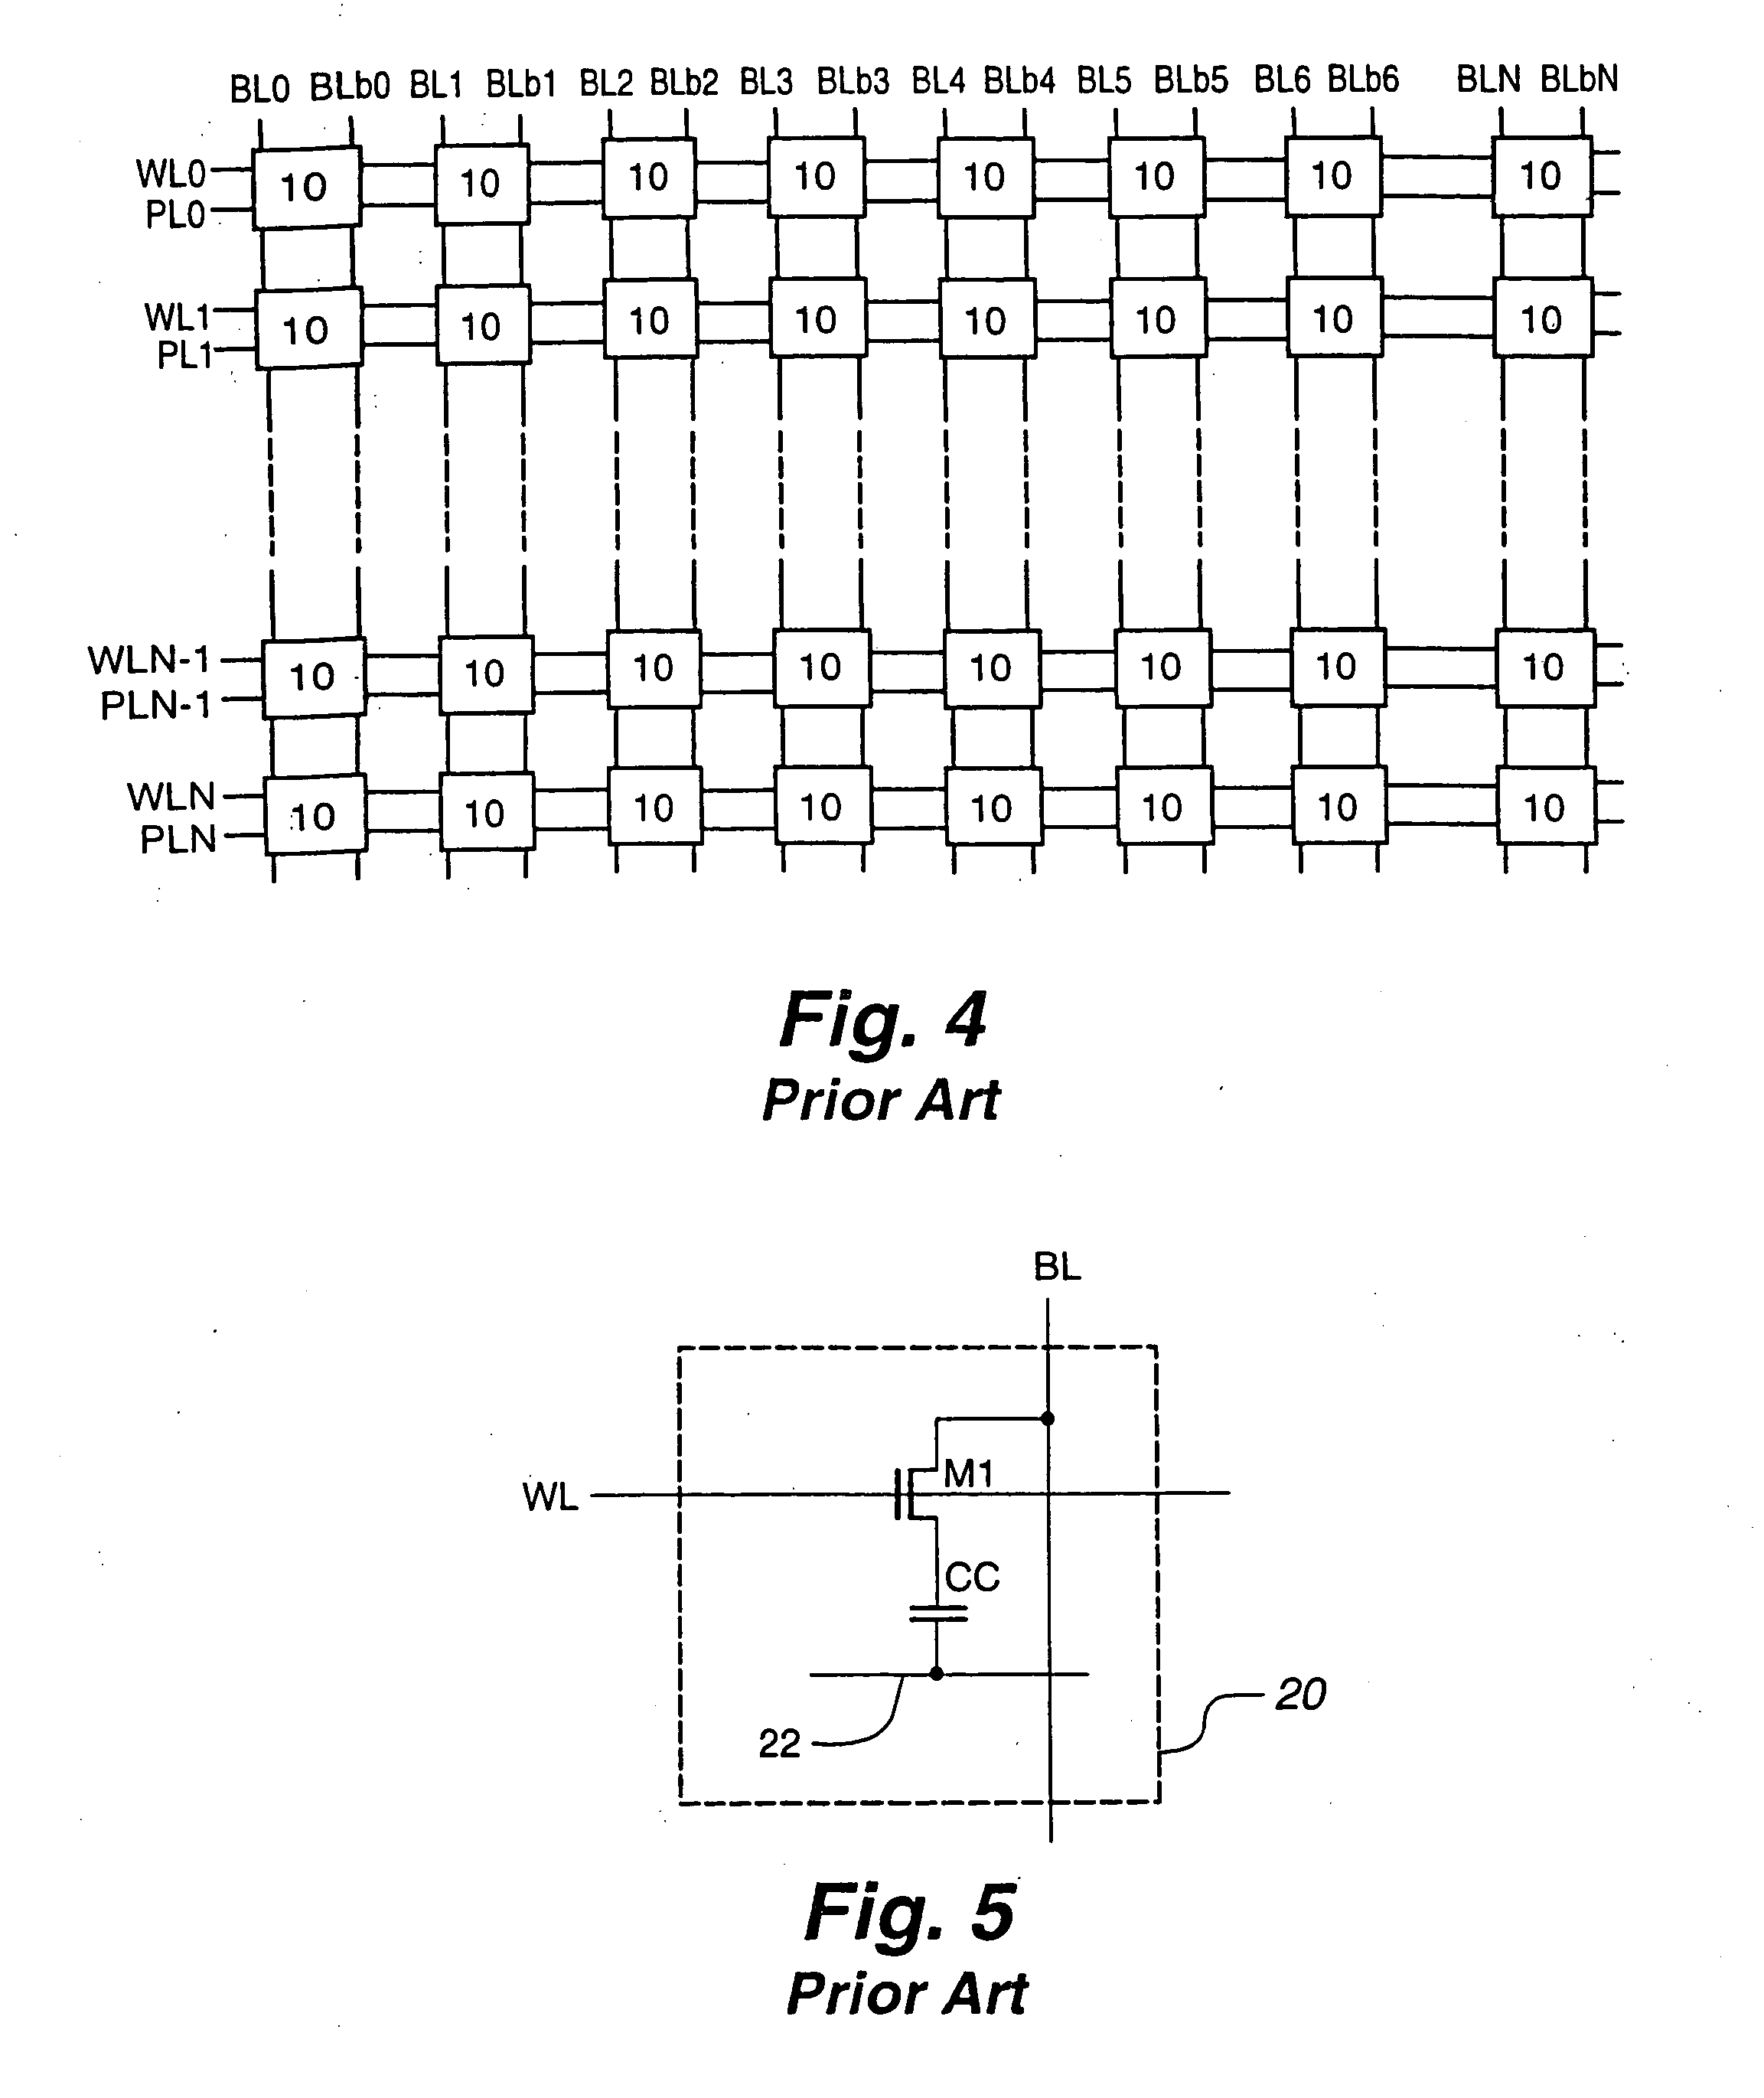 Reference cell configuration for a 1T/1C ferroelectric memory